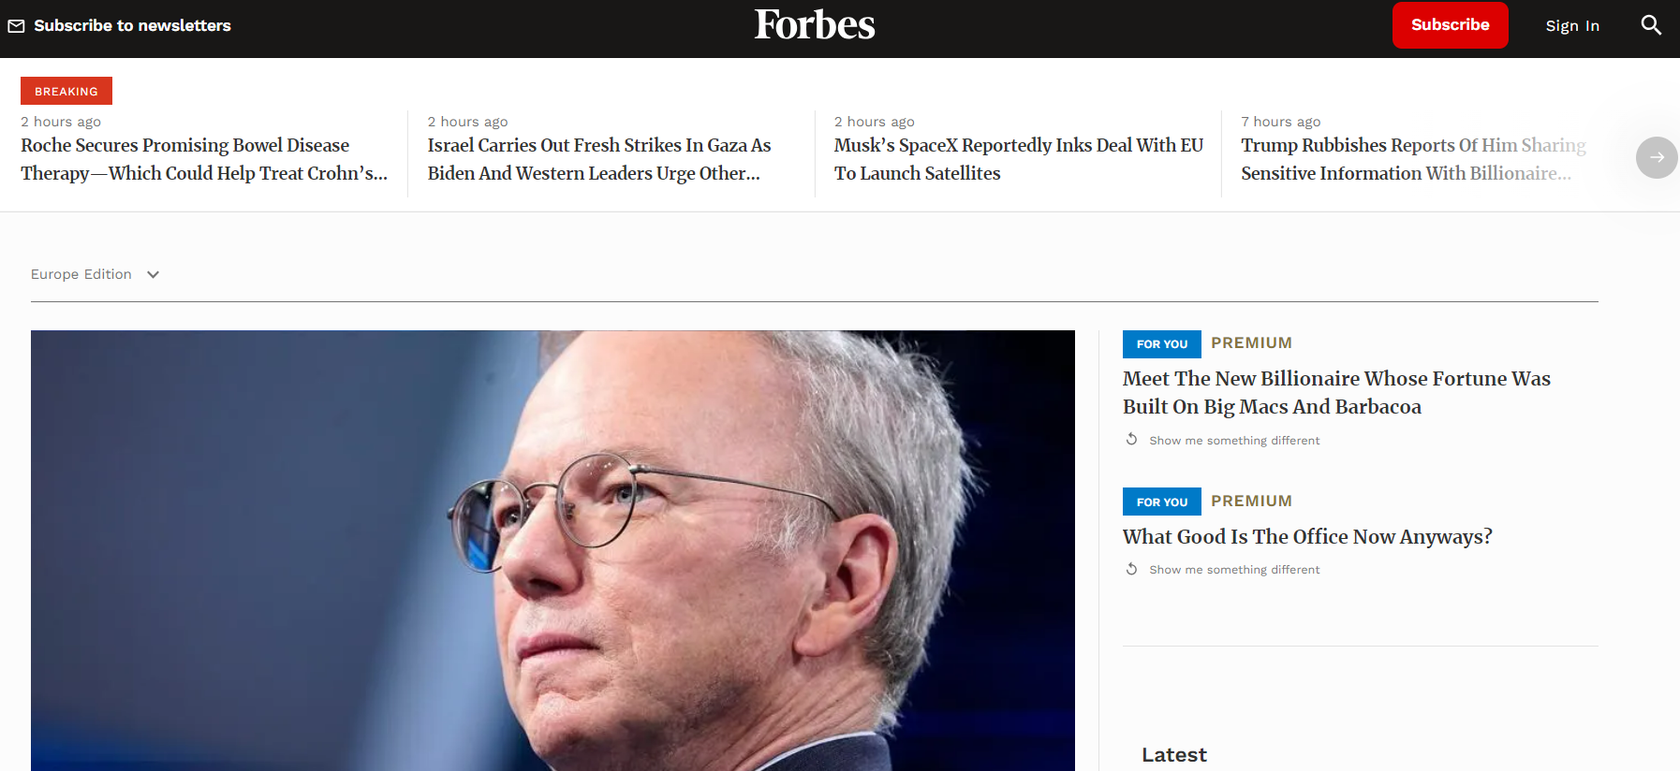 Forbes main page